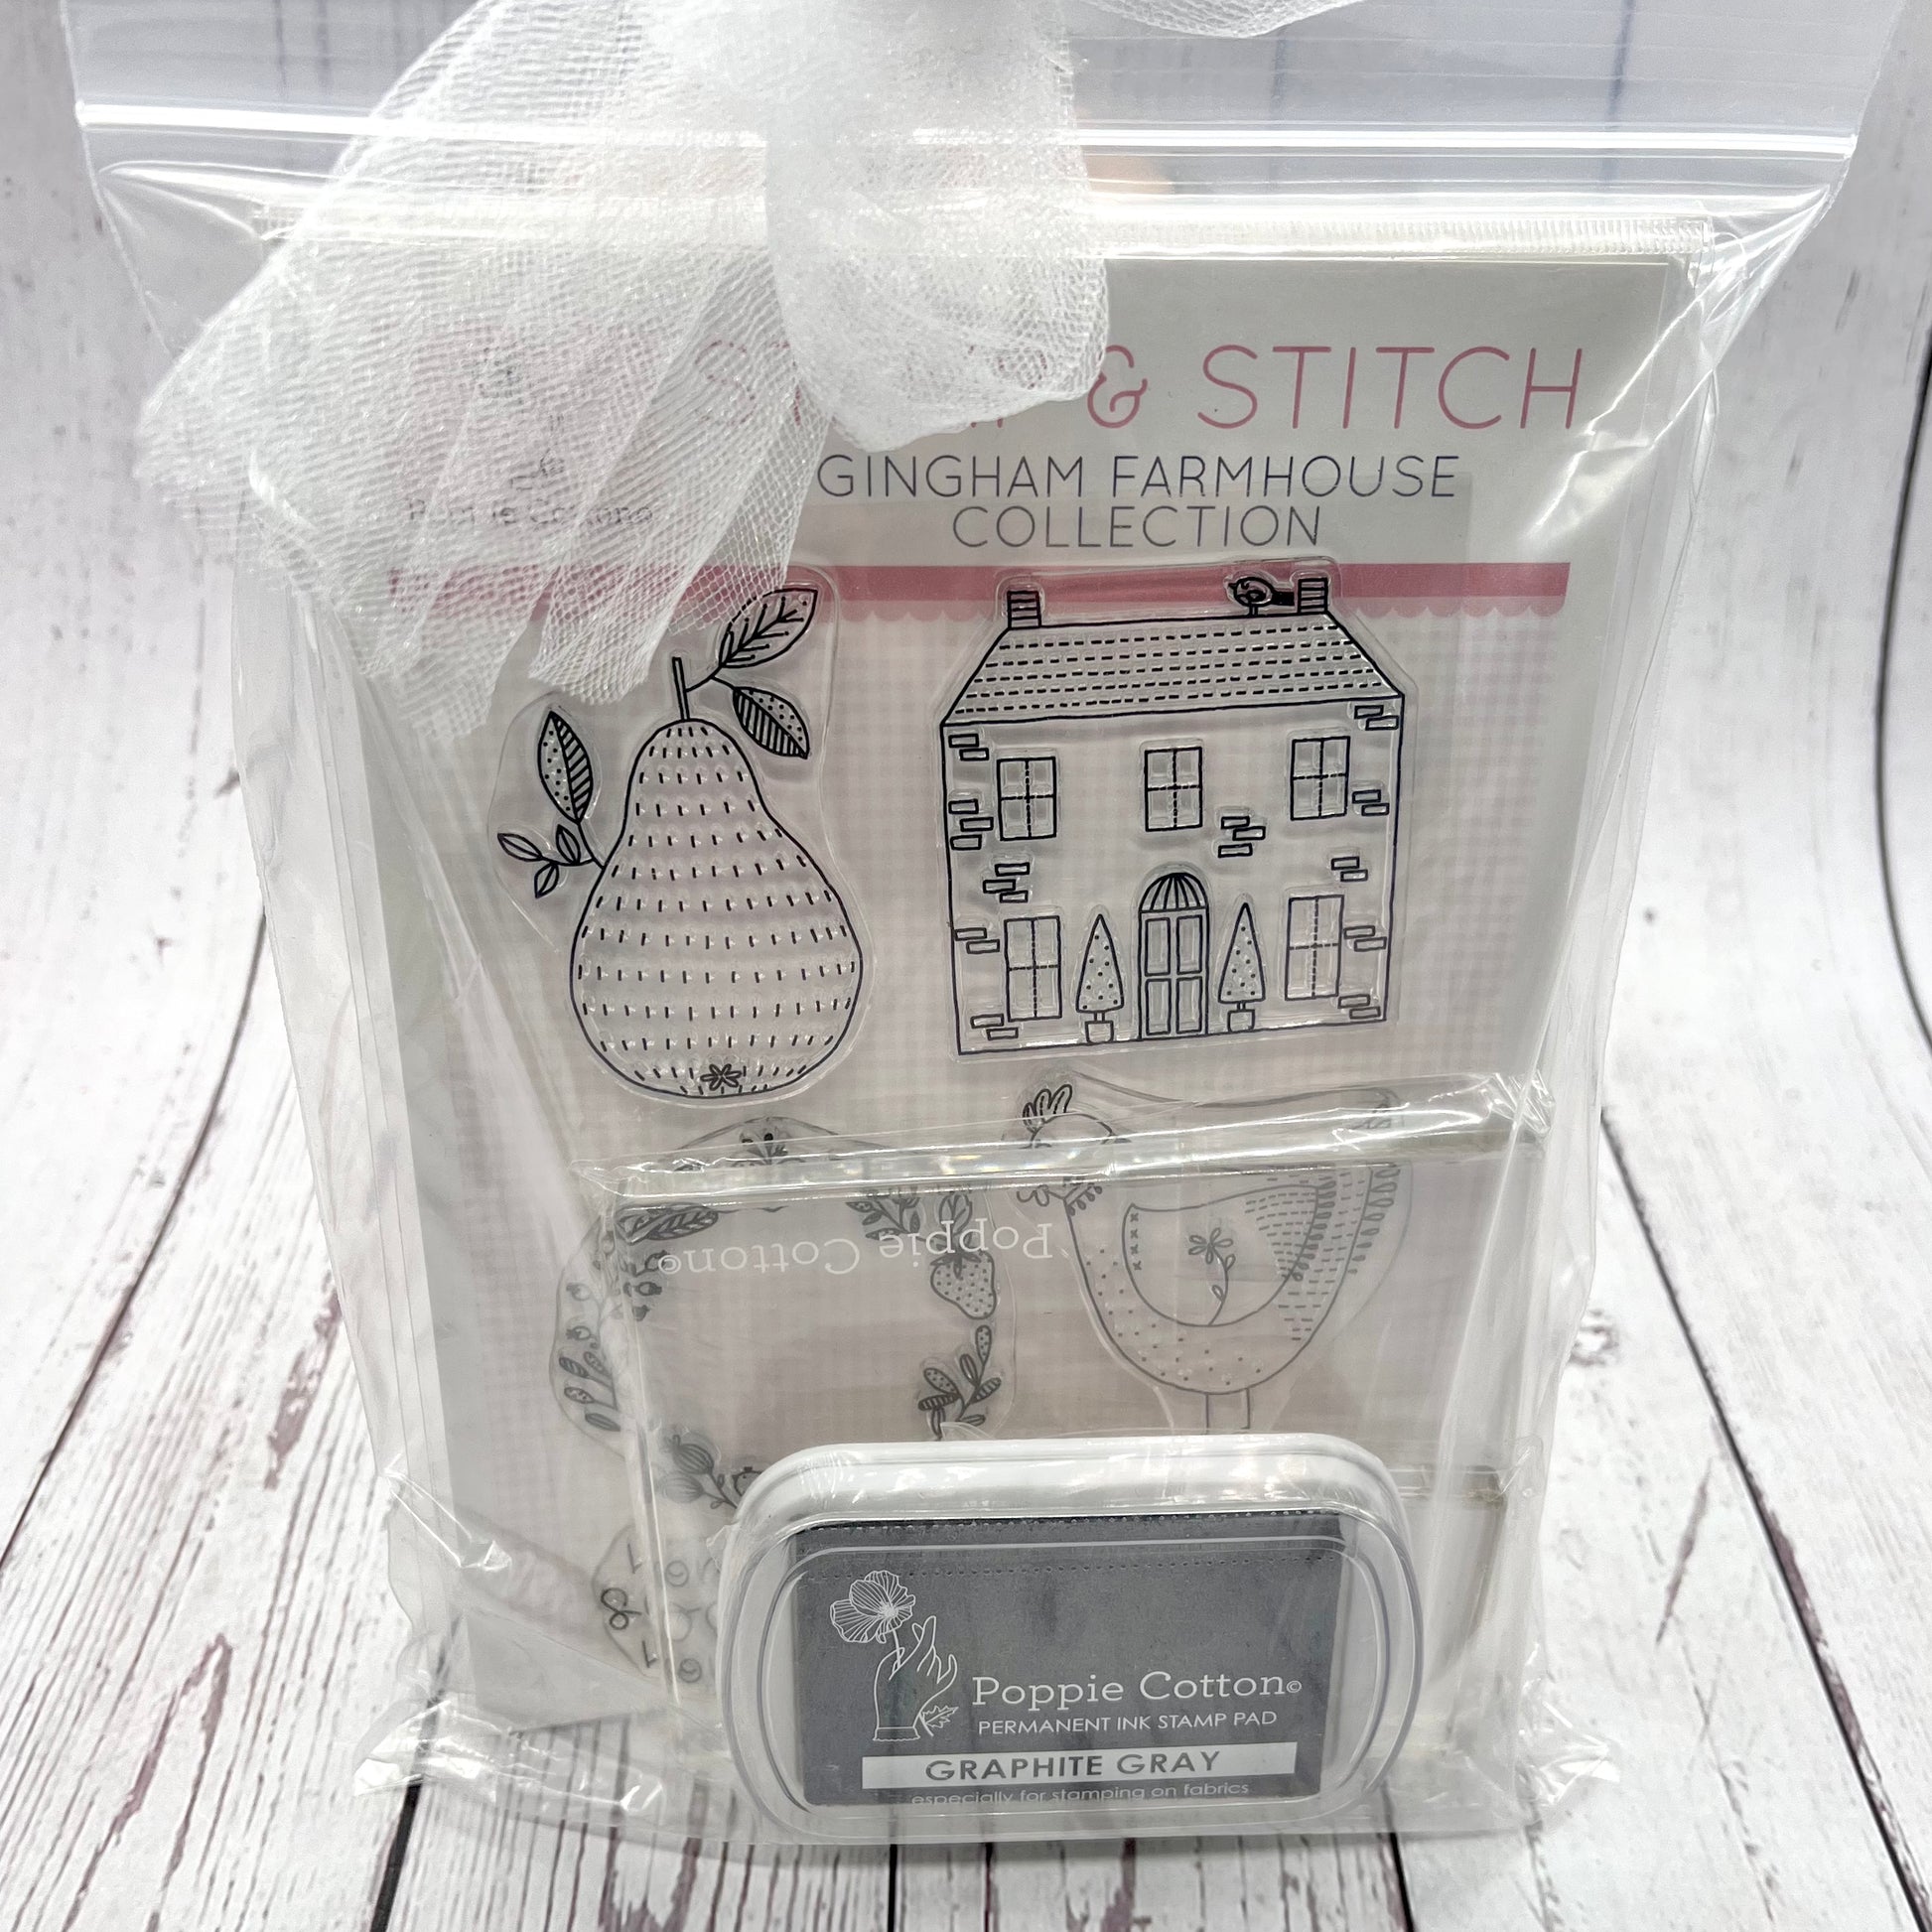 Stamp and Stitch Show Promo Packages, LIMITED QUANTITIES! - Good Vibes Quilt Shop